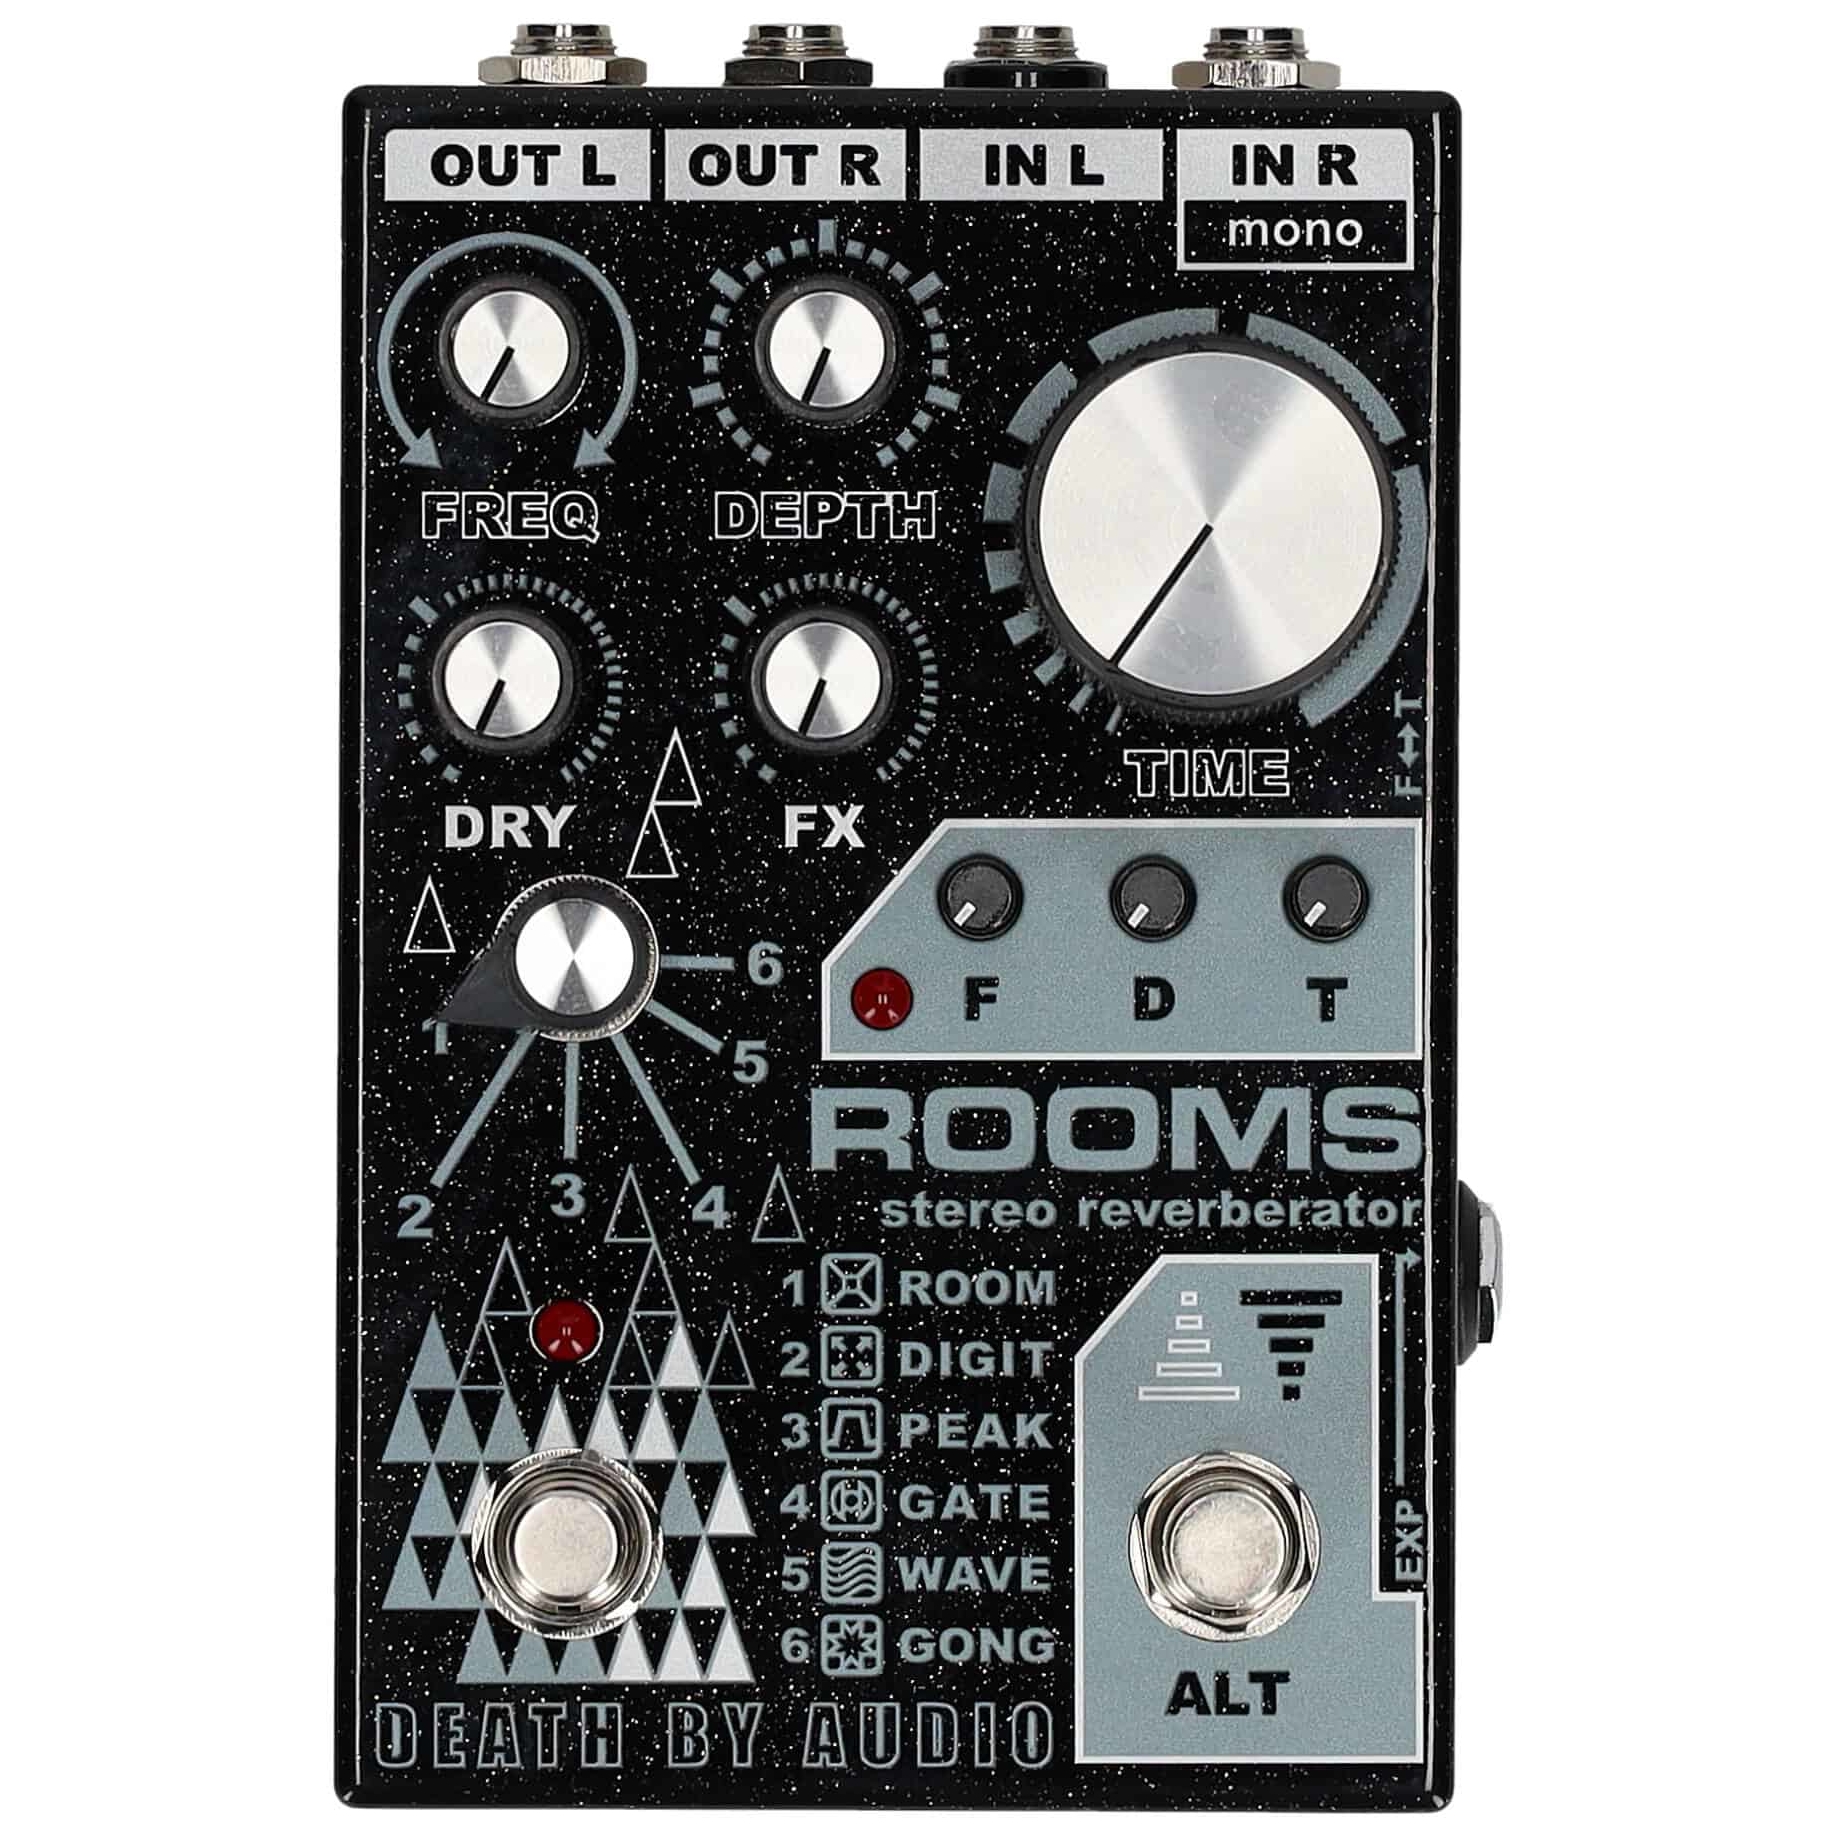 Death By Audio Rooms - Stereo Reverberator